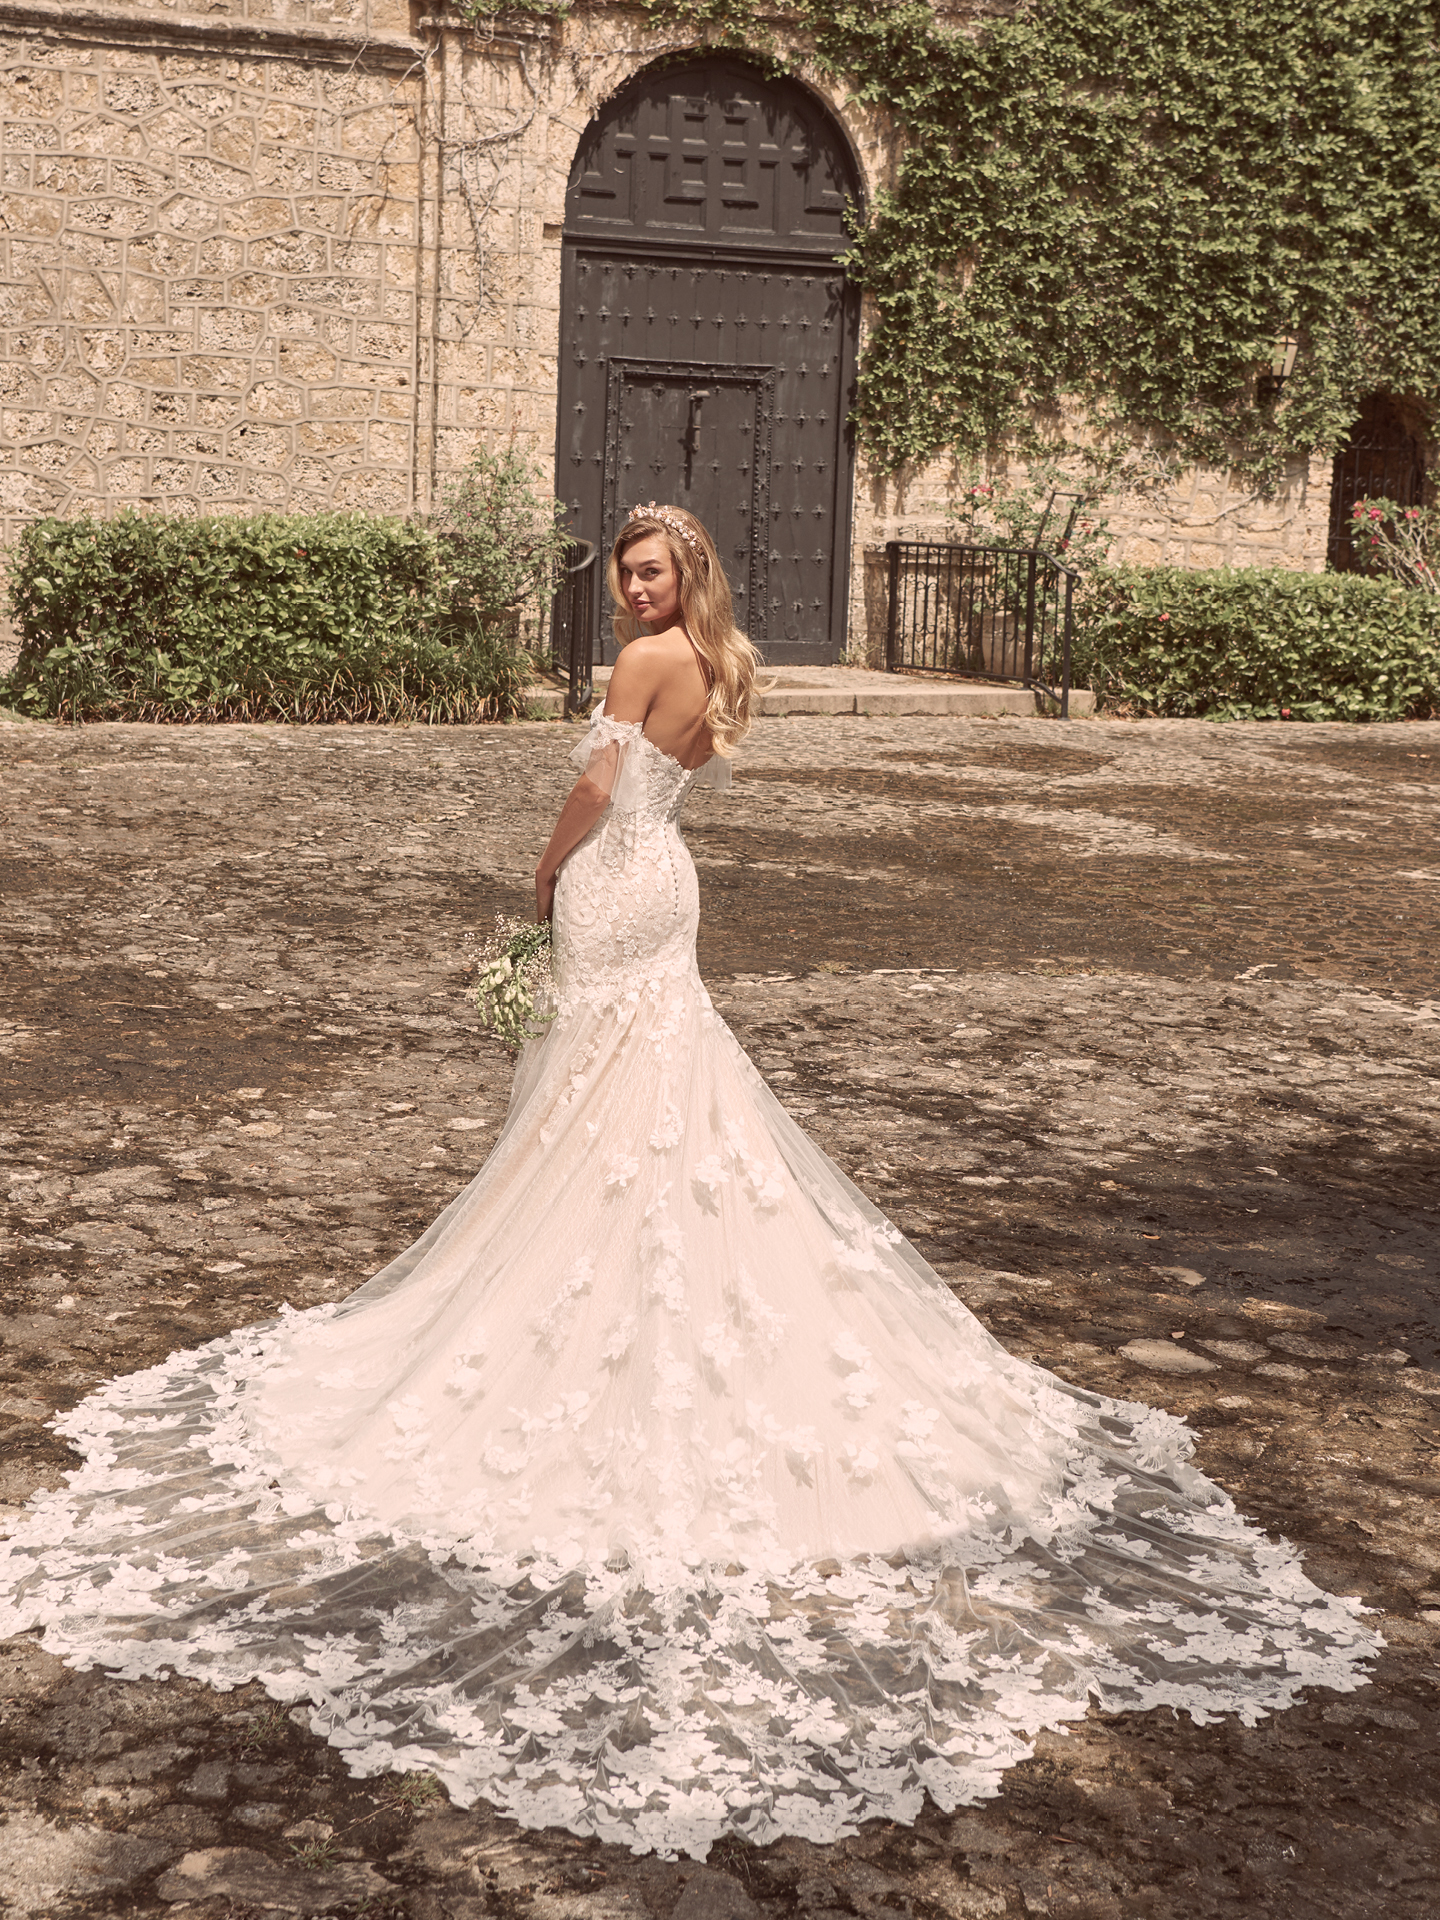 Model Wearing Sparkly Mermaid Bridal Dress with Extended Train Called Joelle by Maggie Sottero